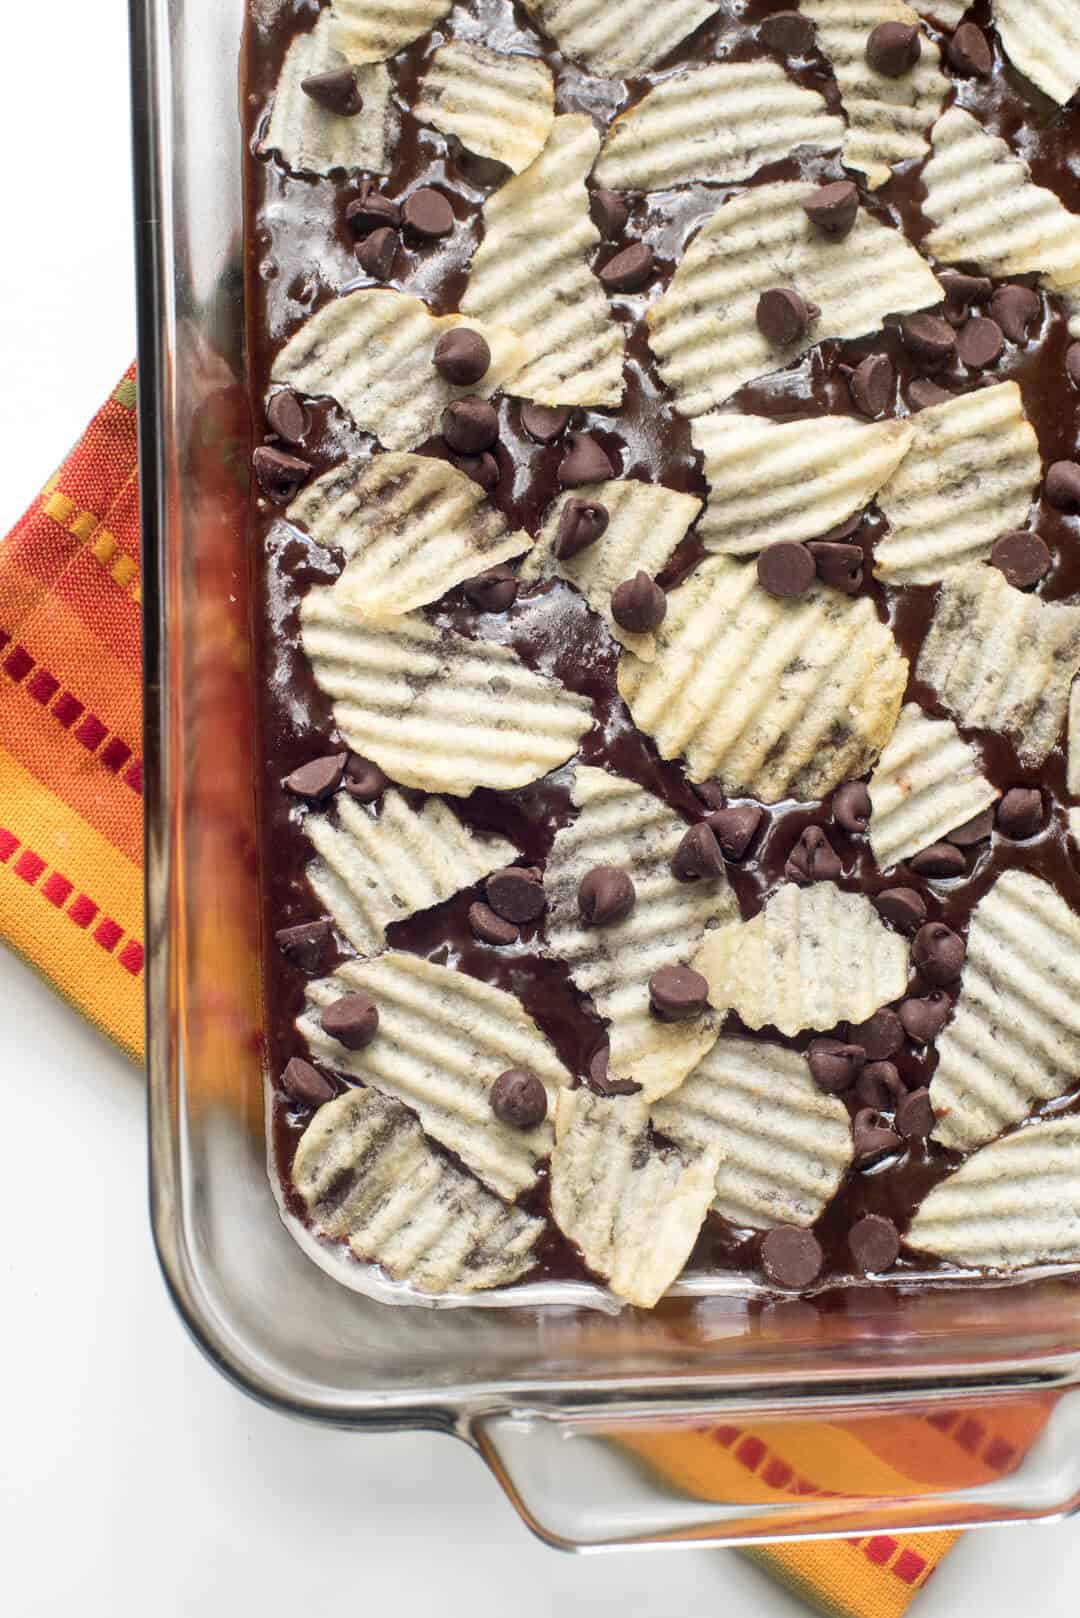 Brownie batter topped with potato chips and chocolate chips in a baking dish.